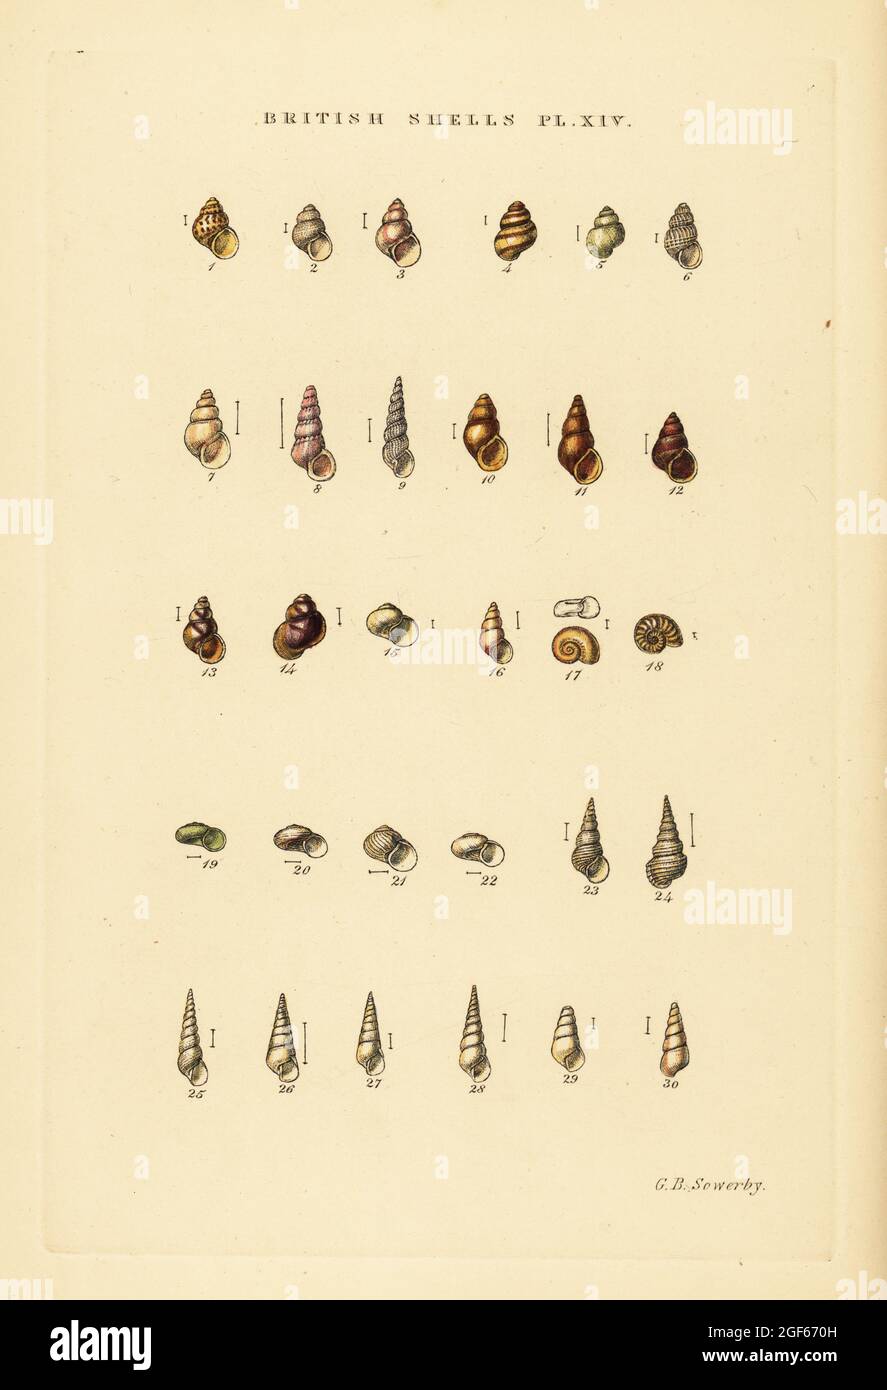 Minute sea shell varieties, Rissoa, Jeffreysia, Aclis, etc. Handcoloured copperplate engraving by George Brettingham Sowerby from his own Illustrated Index of British Shells, Sowerby and Simpkin, Marshall & Co., London, 1859. George Brettingham Sowerby II (1812-1884), British naturalist, illustrator, and conchologist. Stock Photo